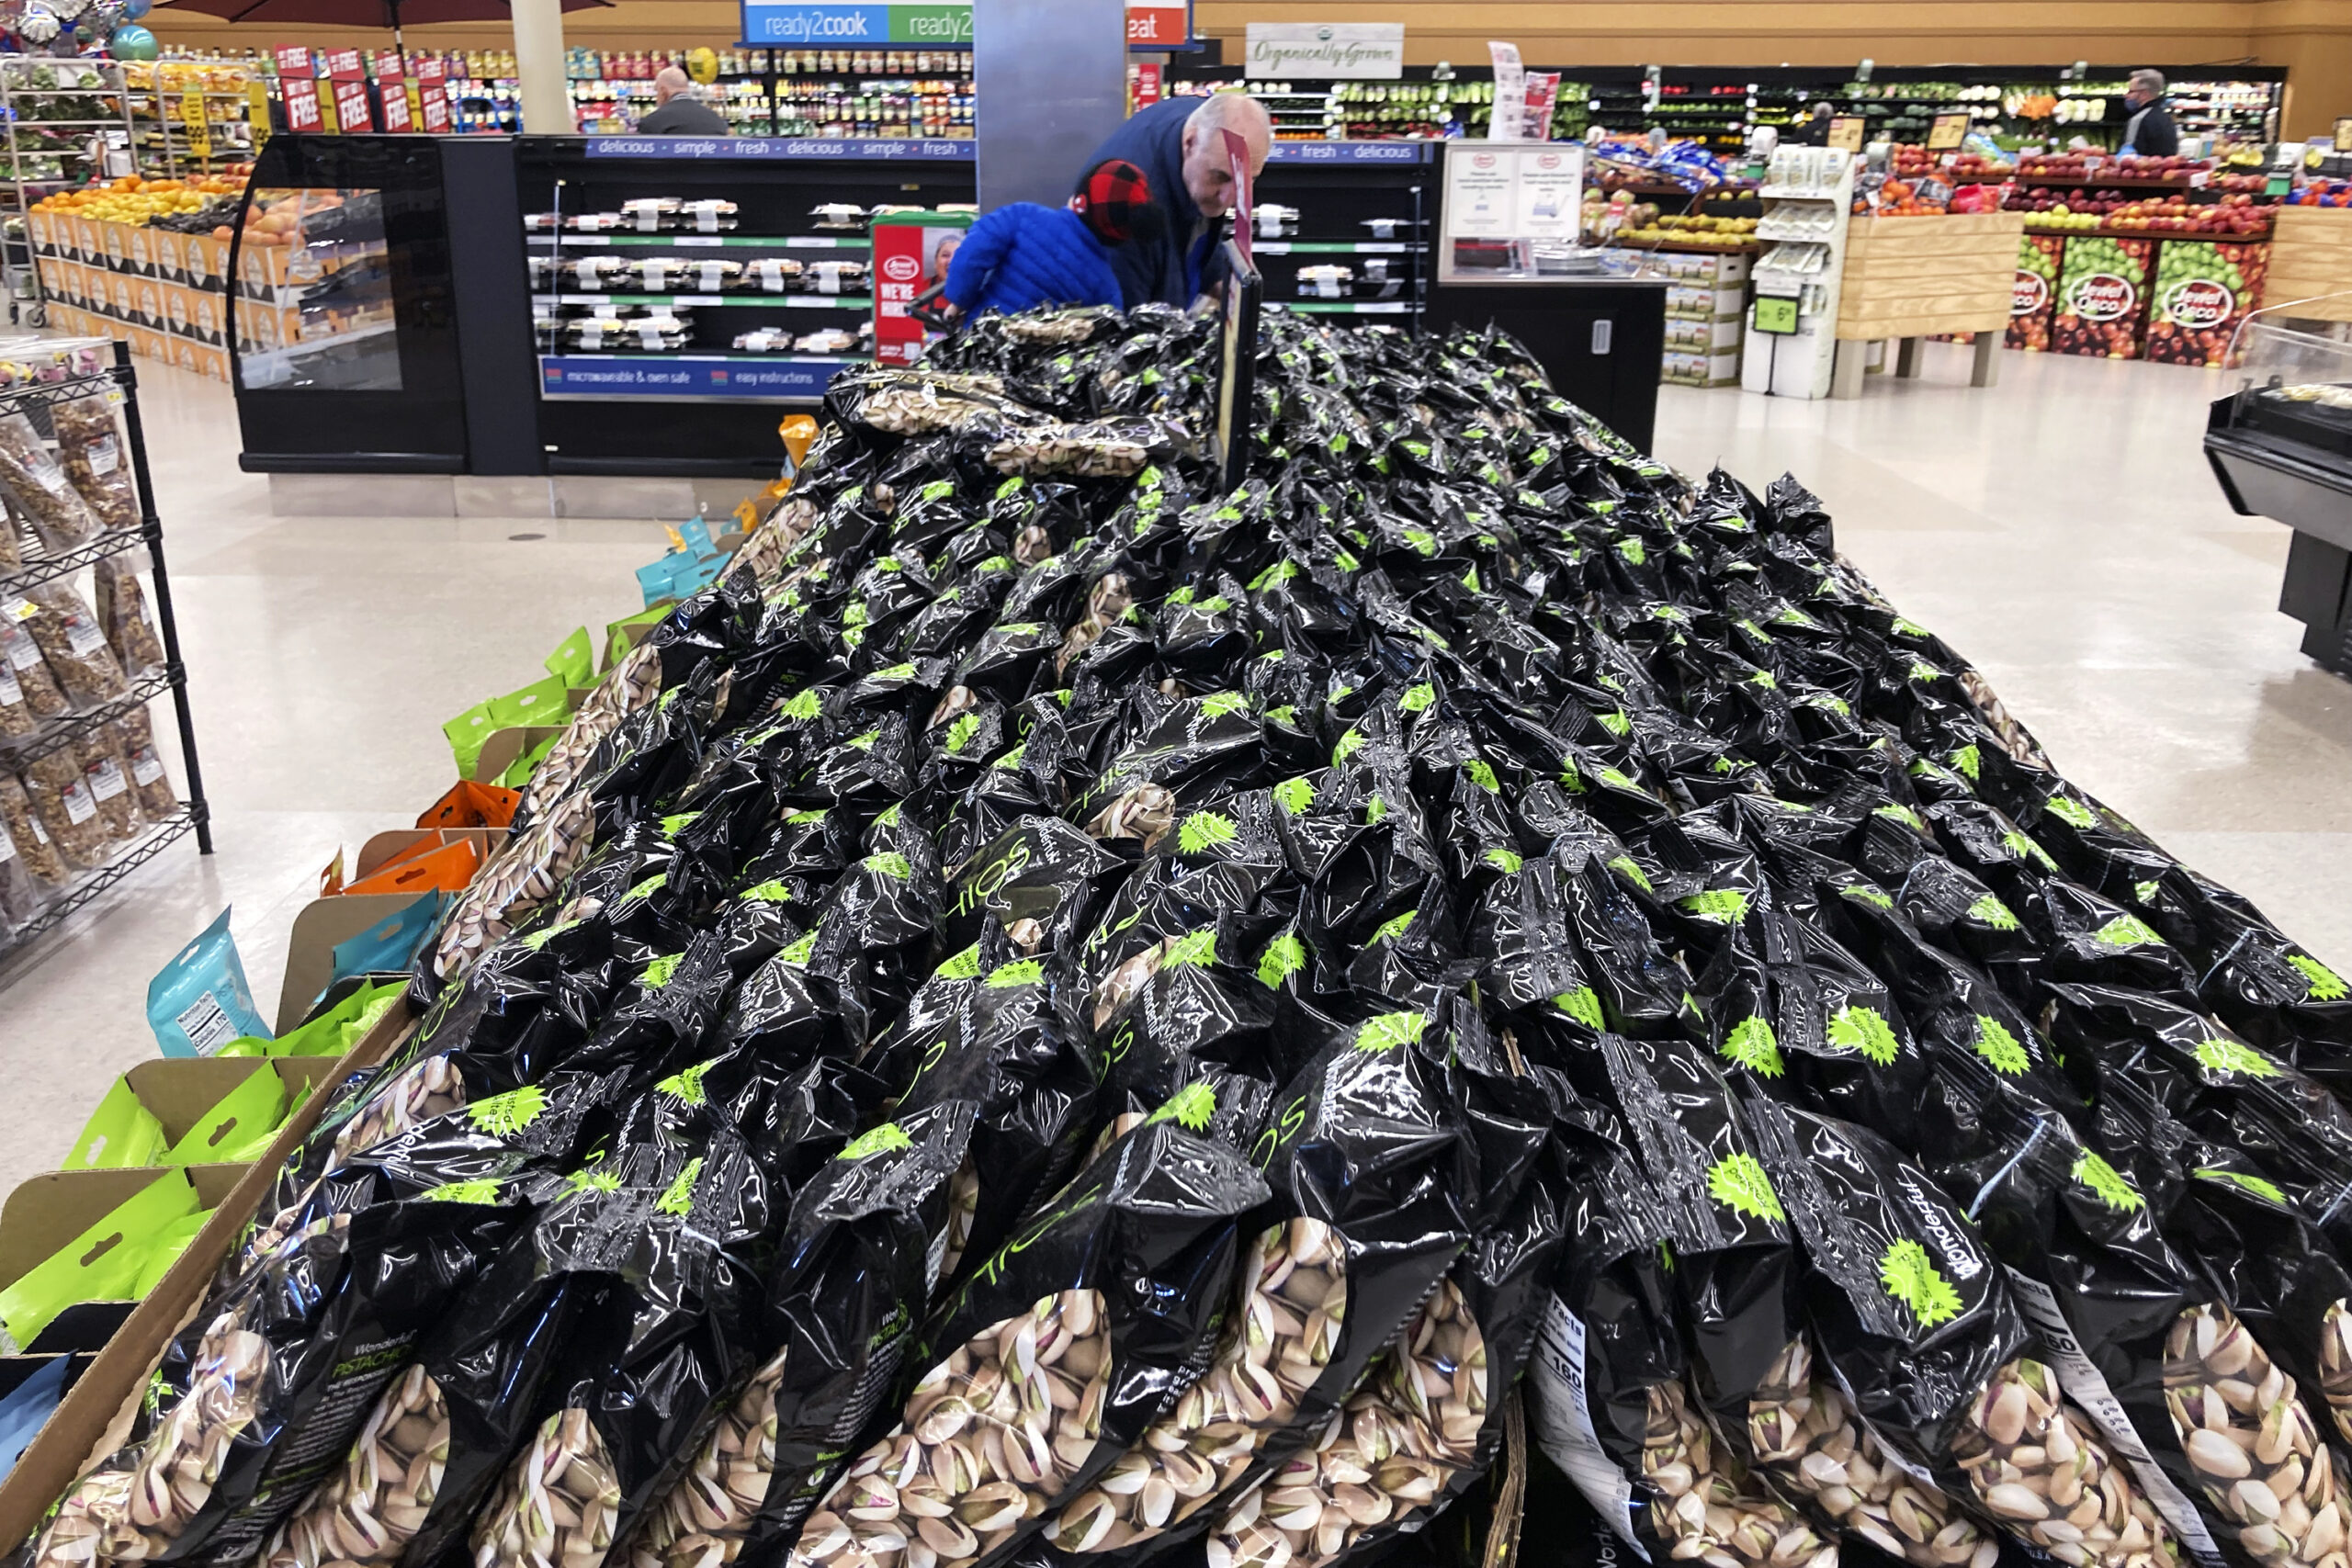 FILE - Bags of Pistachios are displayed at a grocery store in Mount Prospect, Ill., on, April 1, 2022. Consumer prices surged 8.6% last month from 12 months earlier, faster than April’s year-over-year surge of 8.3%, the Labor Department said Friday, June 10, 2022. (AP Photo/Nam Y. Huh)